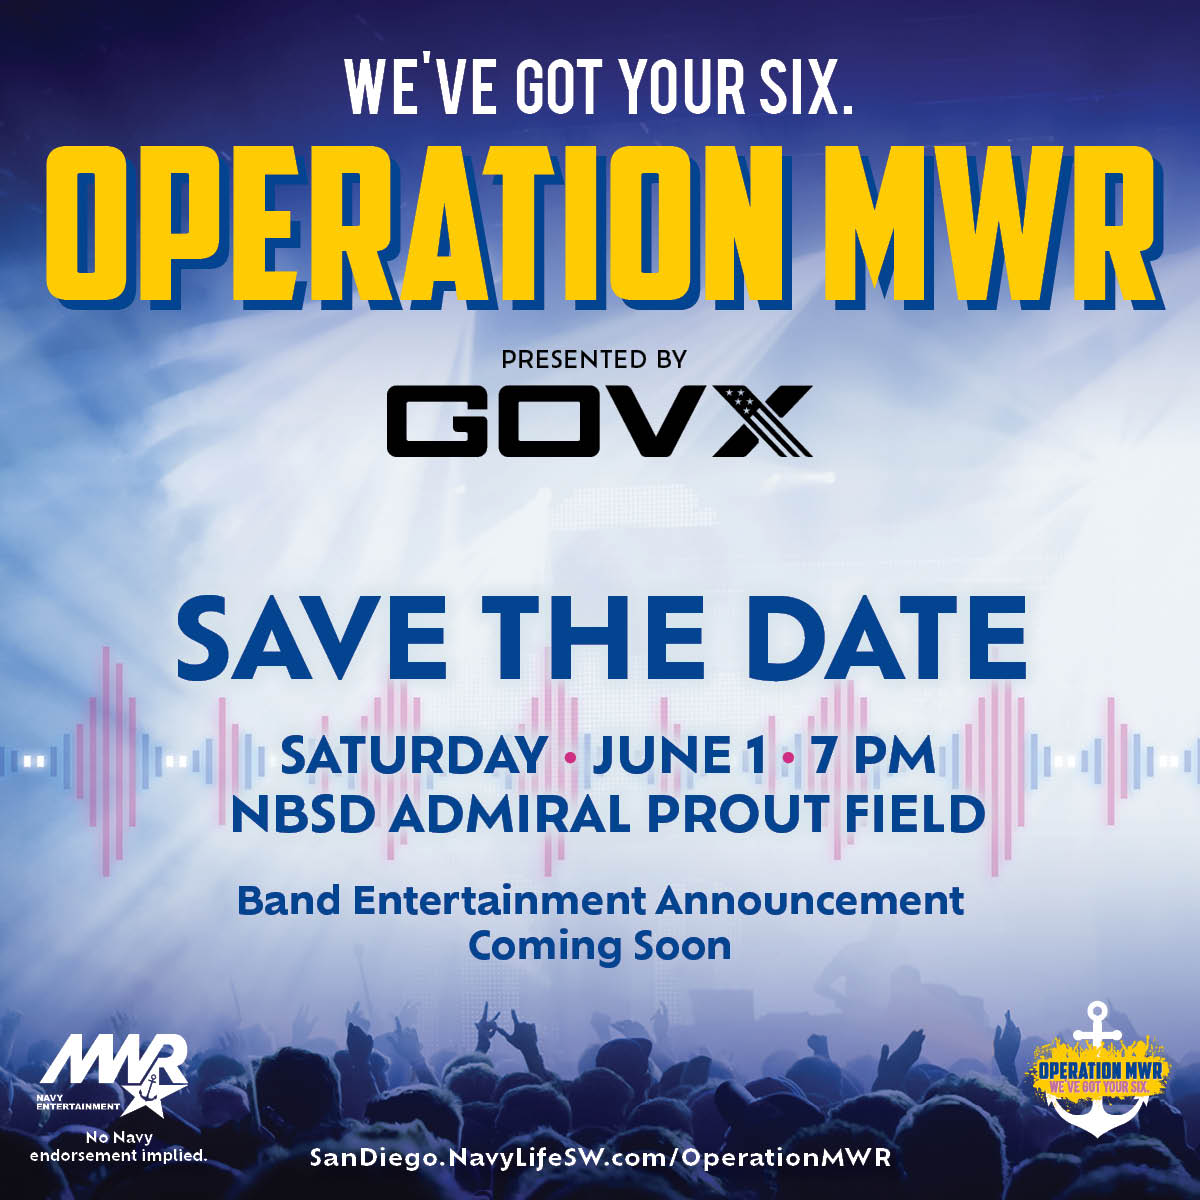 Bands to be announced but we promise they will be awesome. Anyone with base access is able to attend and food and drinks will be available for purchase. Stay tuned for an update on the bands. #navalbasesd #mwrrocks #nbsd